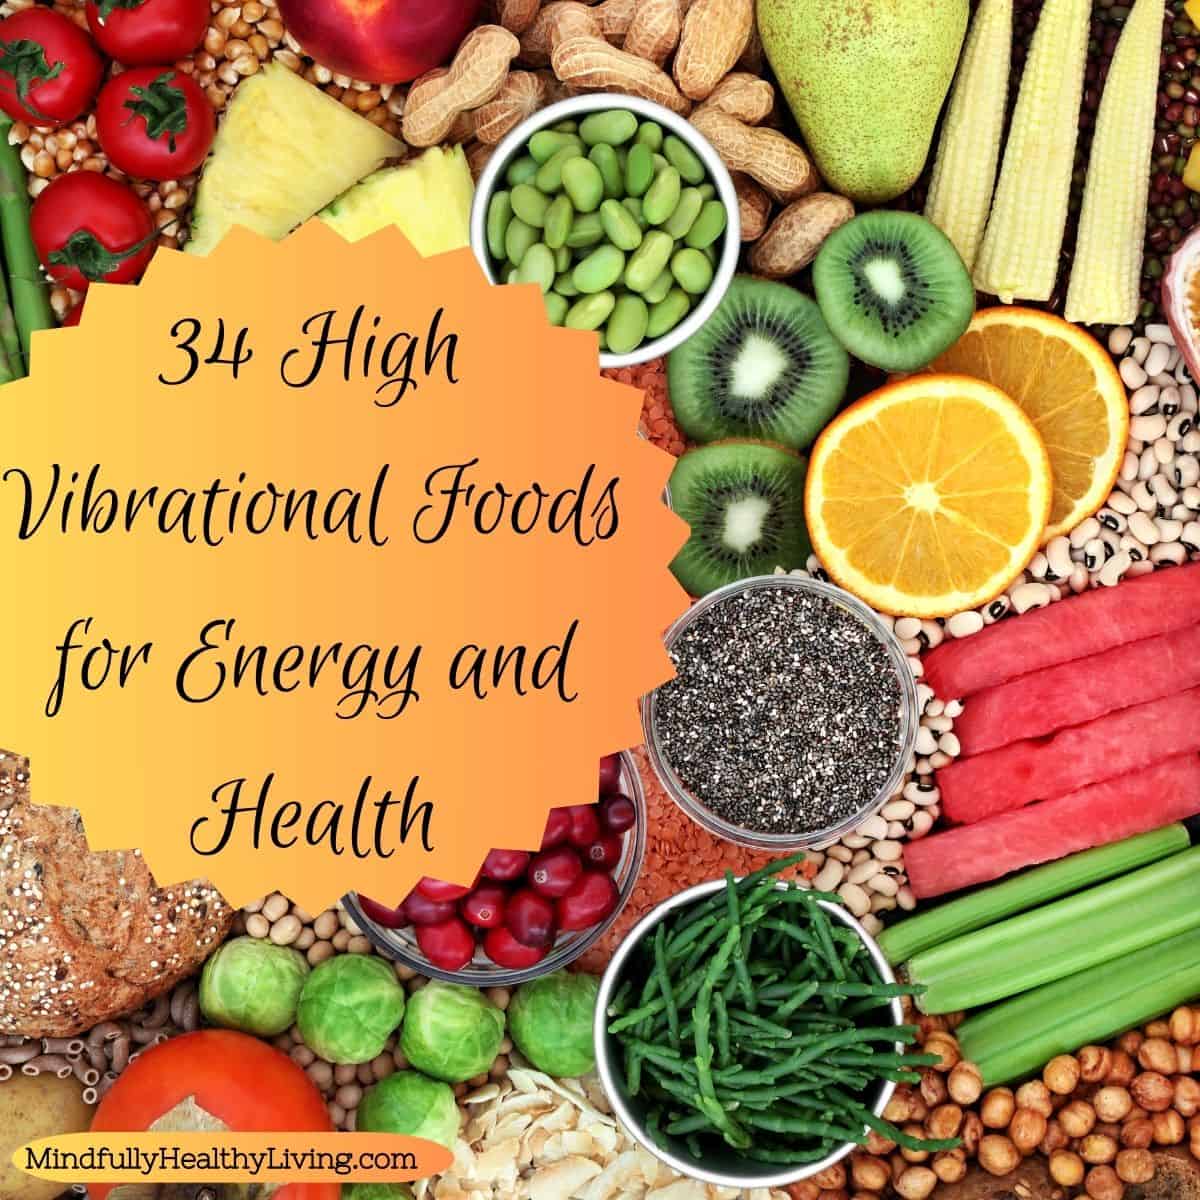 a closeup collage of brightly colored foods including nuts, seeds, legumes, peas, grains, Brussel sprouts, asparagus, lima beans, pomegranate, pineapple, and pear with a yellow cut-out overlay with black cursive words that reads "34 high vibrational foods for energy and health"